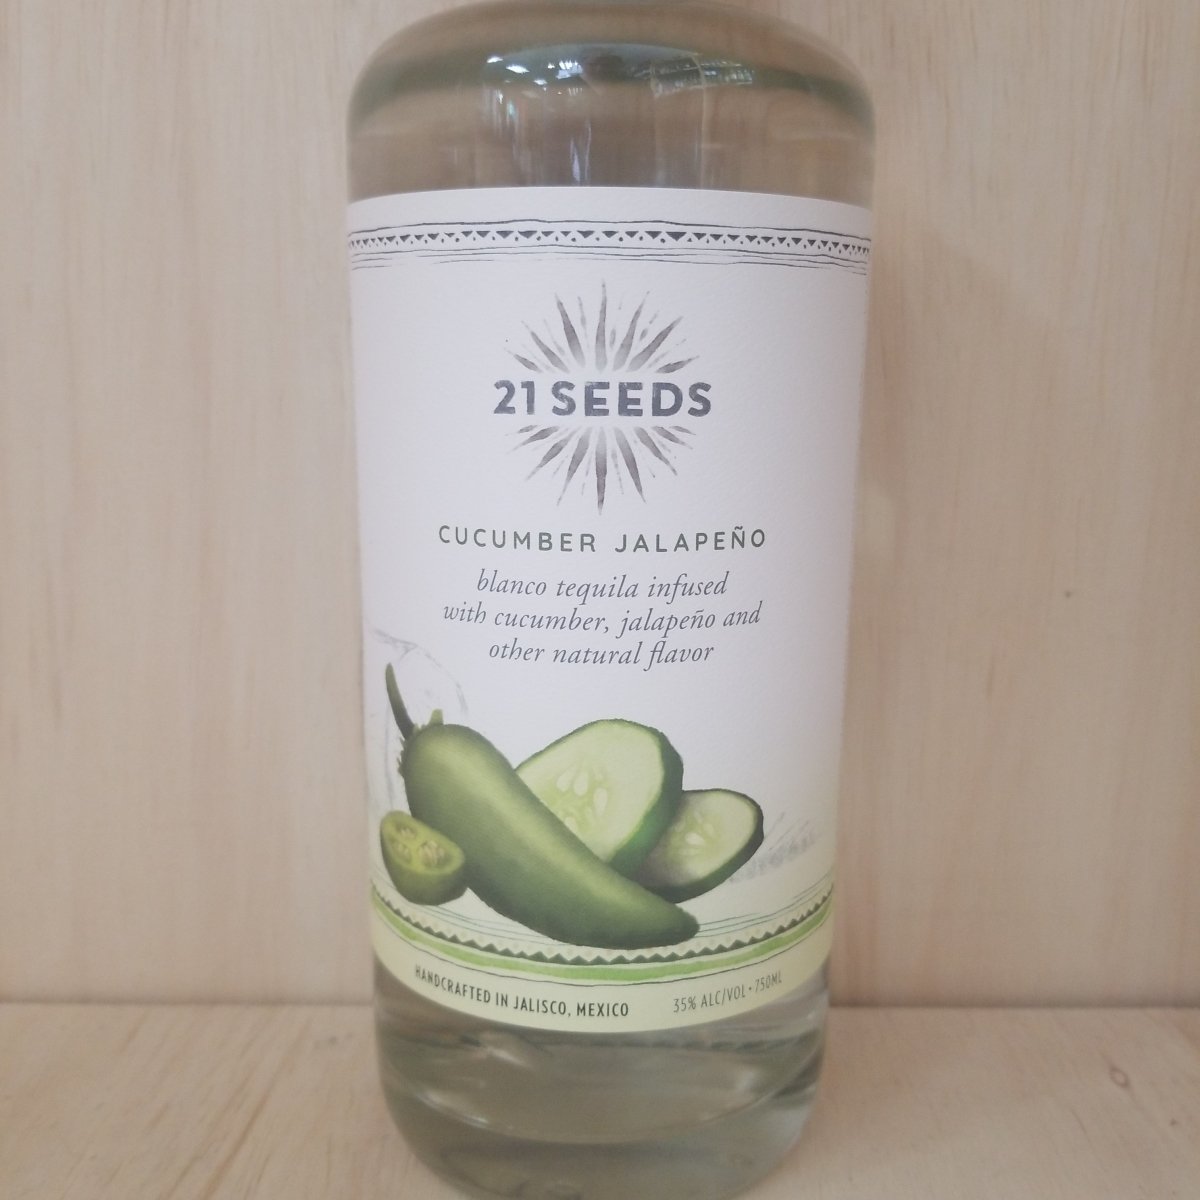 21 Seeds Cucumber Jalapeno Tequila 750ml - Sip & Say